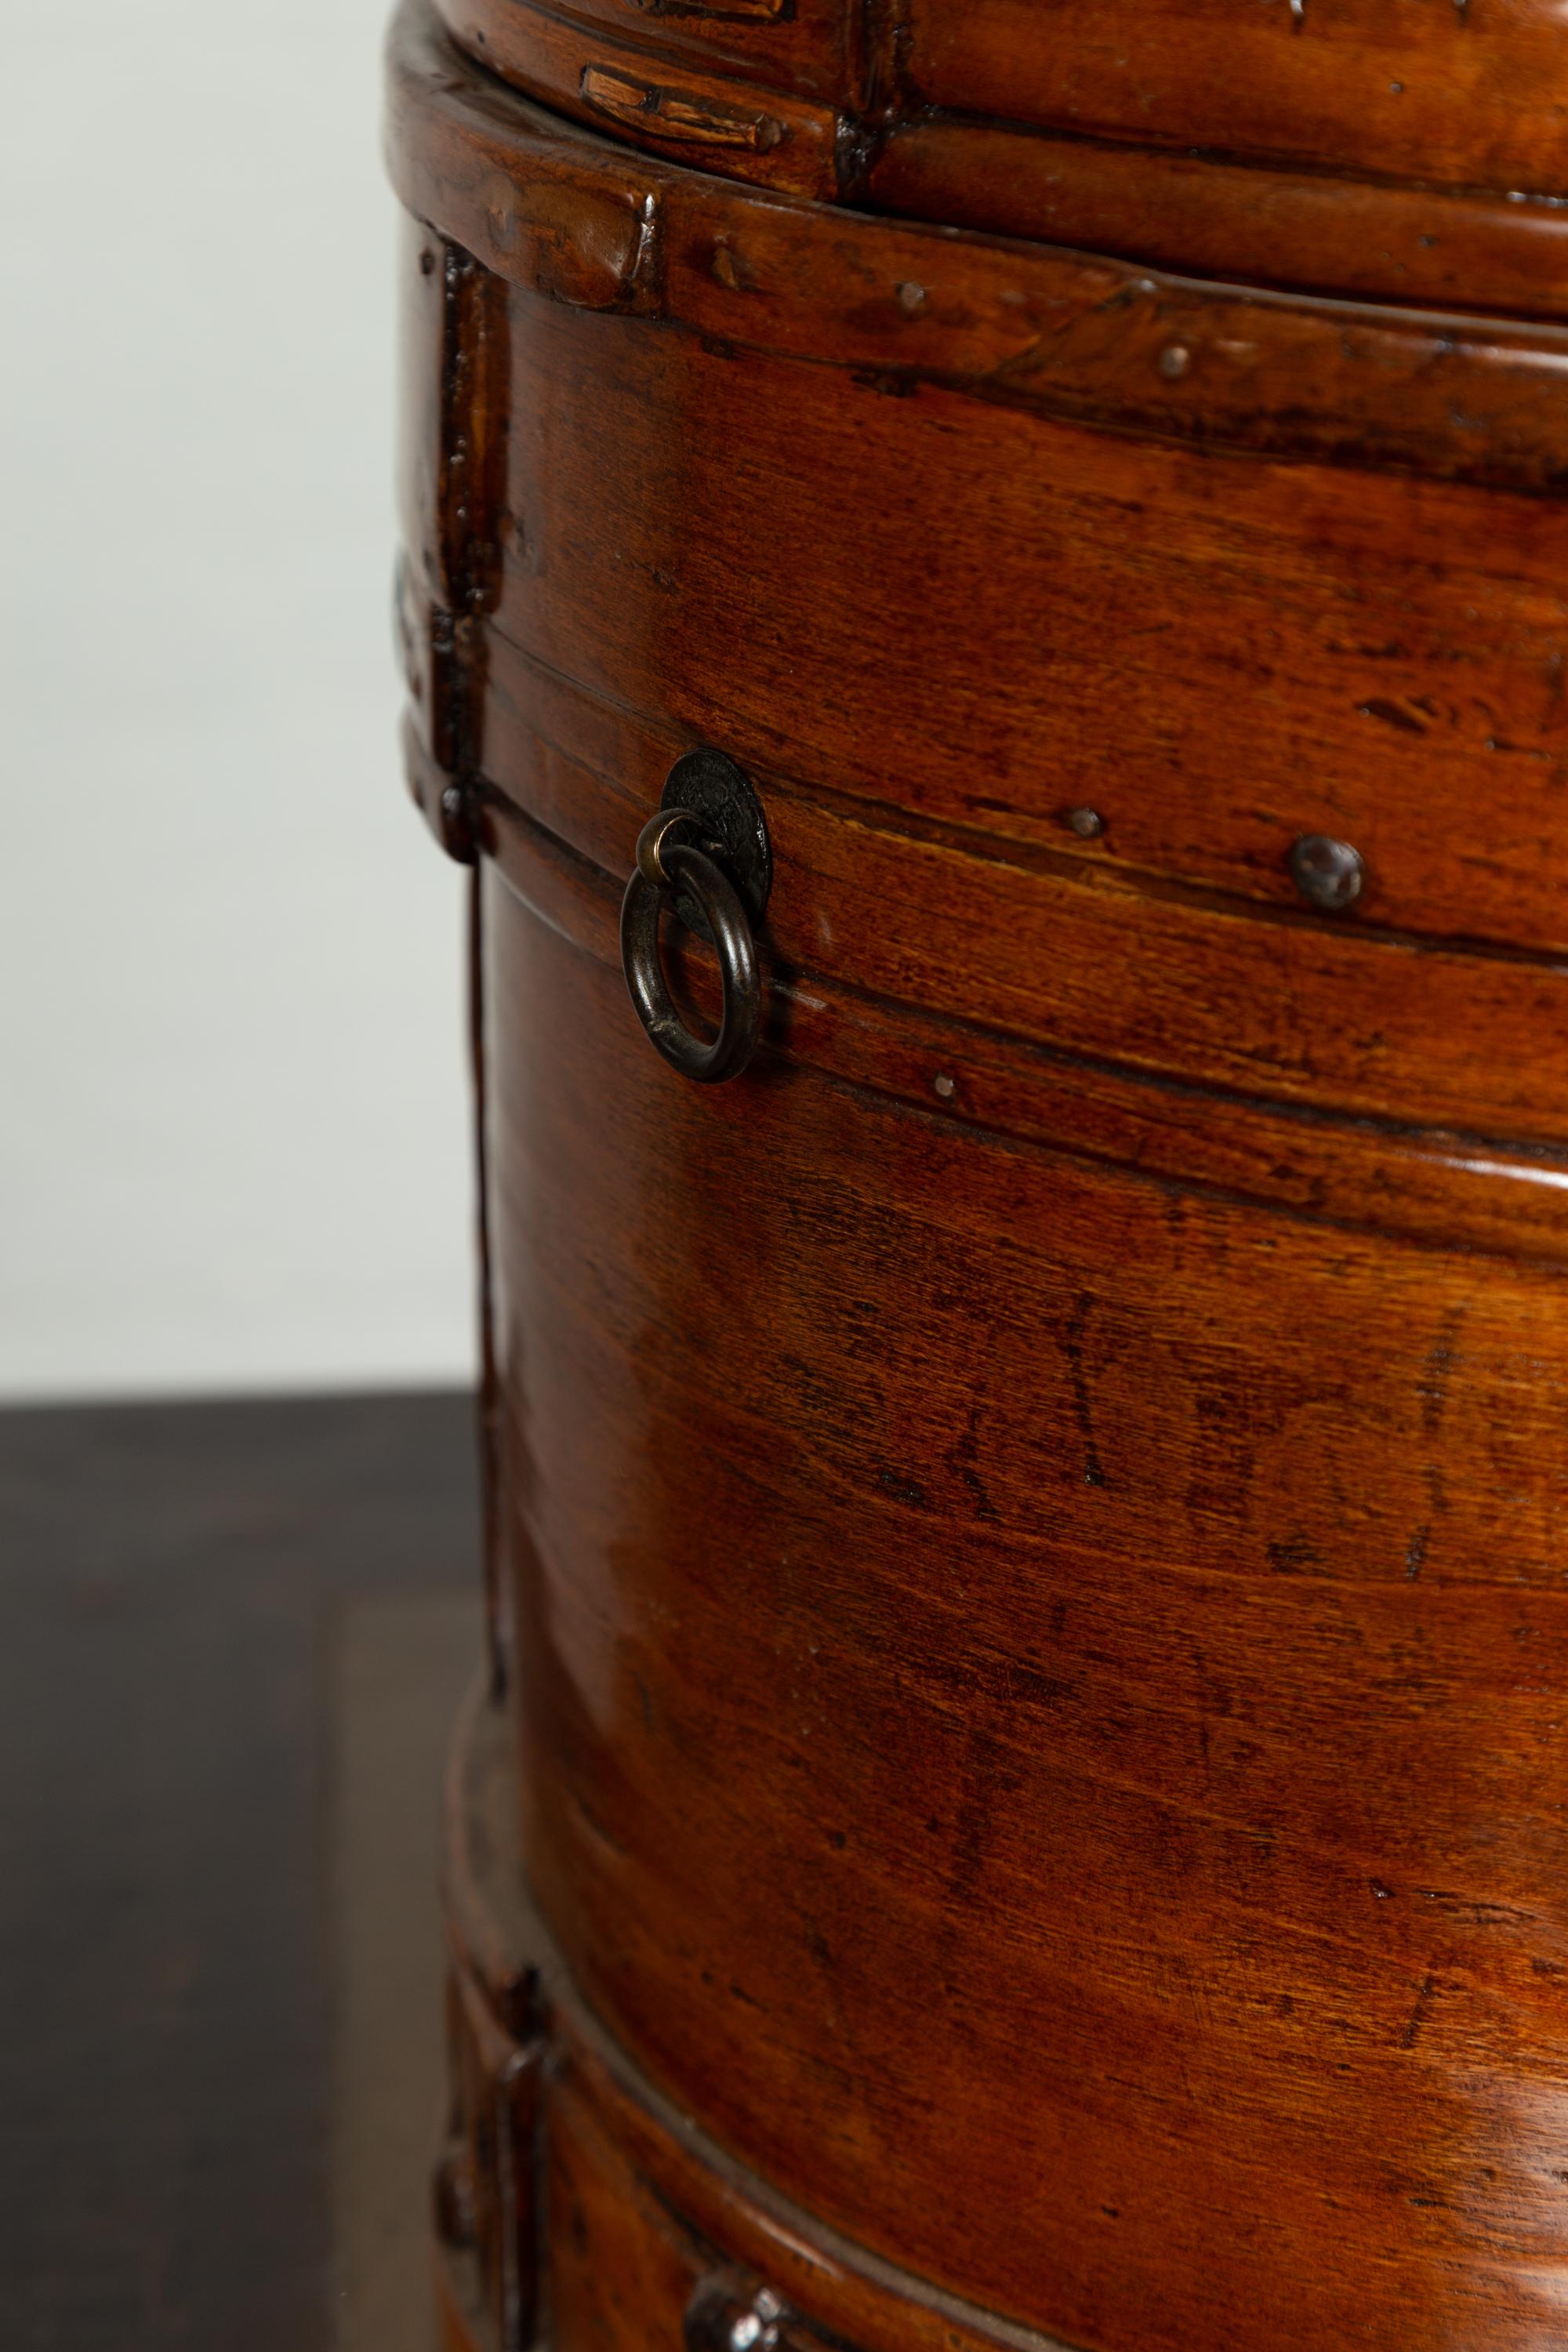 Qing Dynasty 19th Century Round Lidded Wooden Box with Rattan Top In Good Condition For Sale In Yonkers, NY